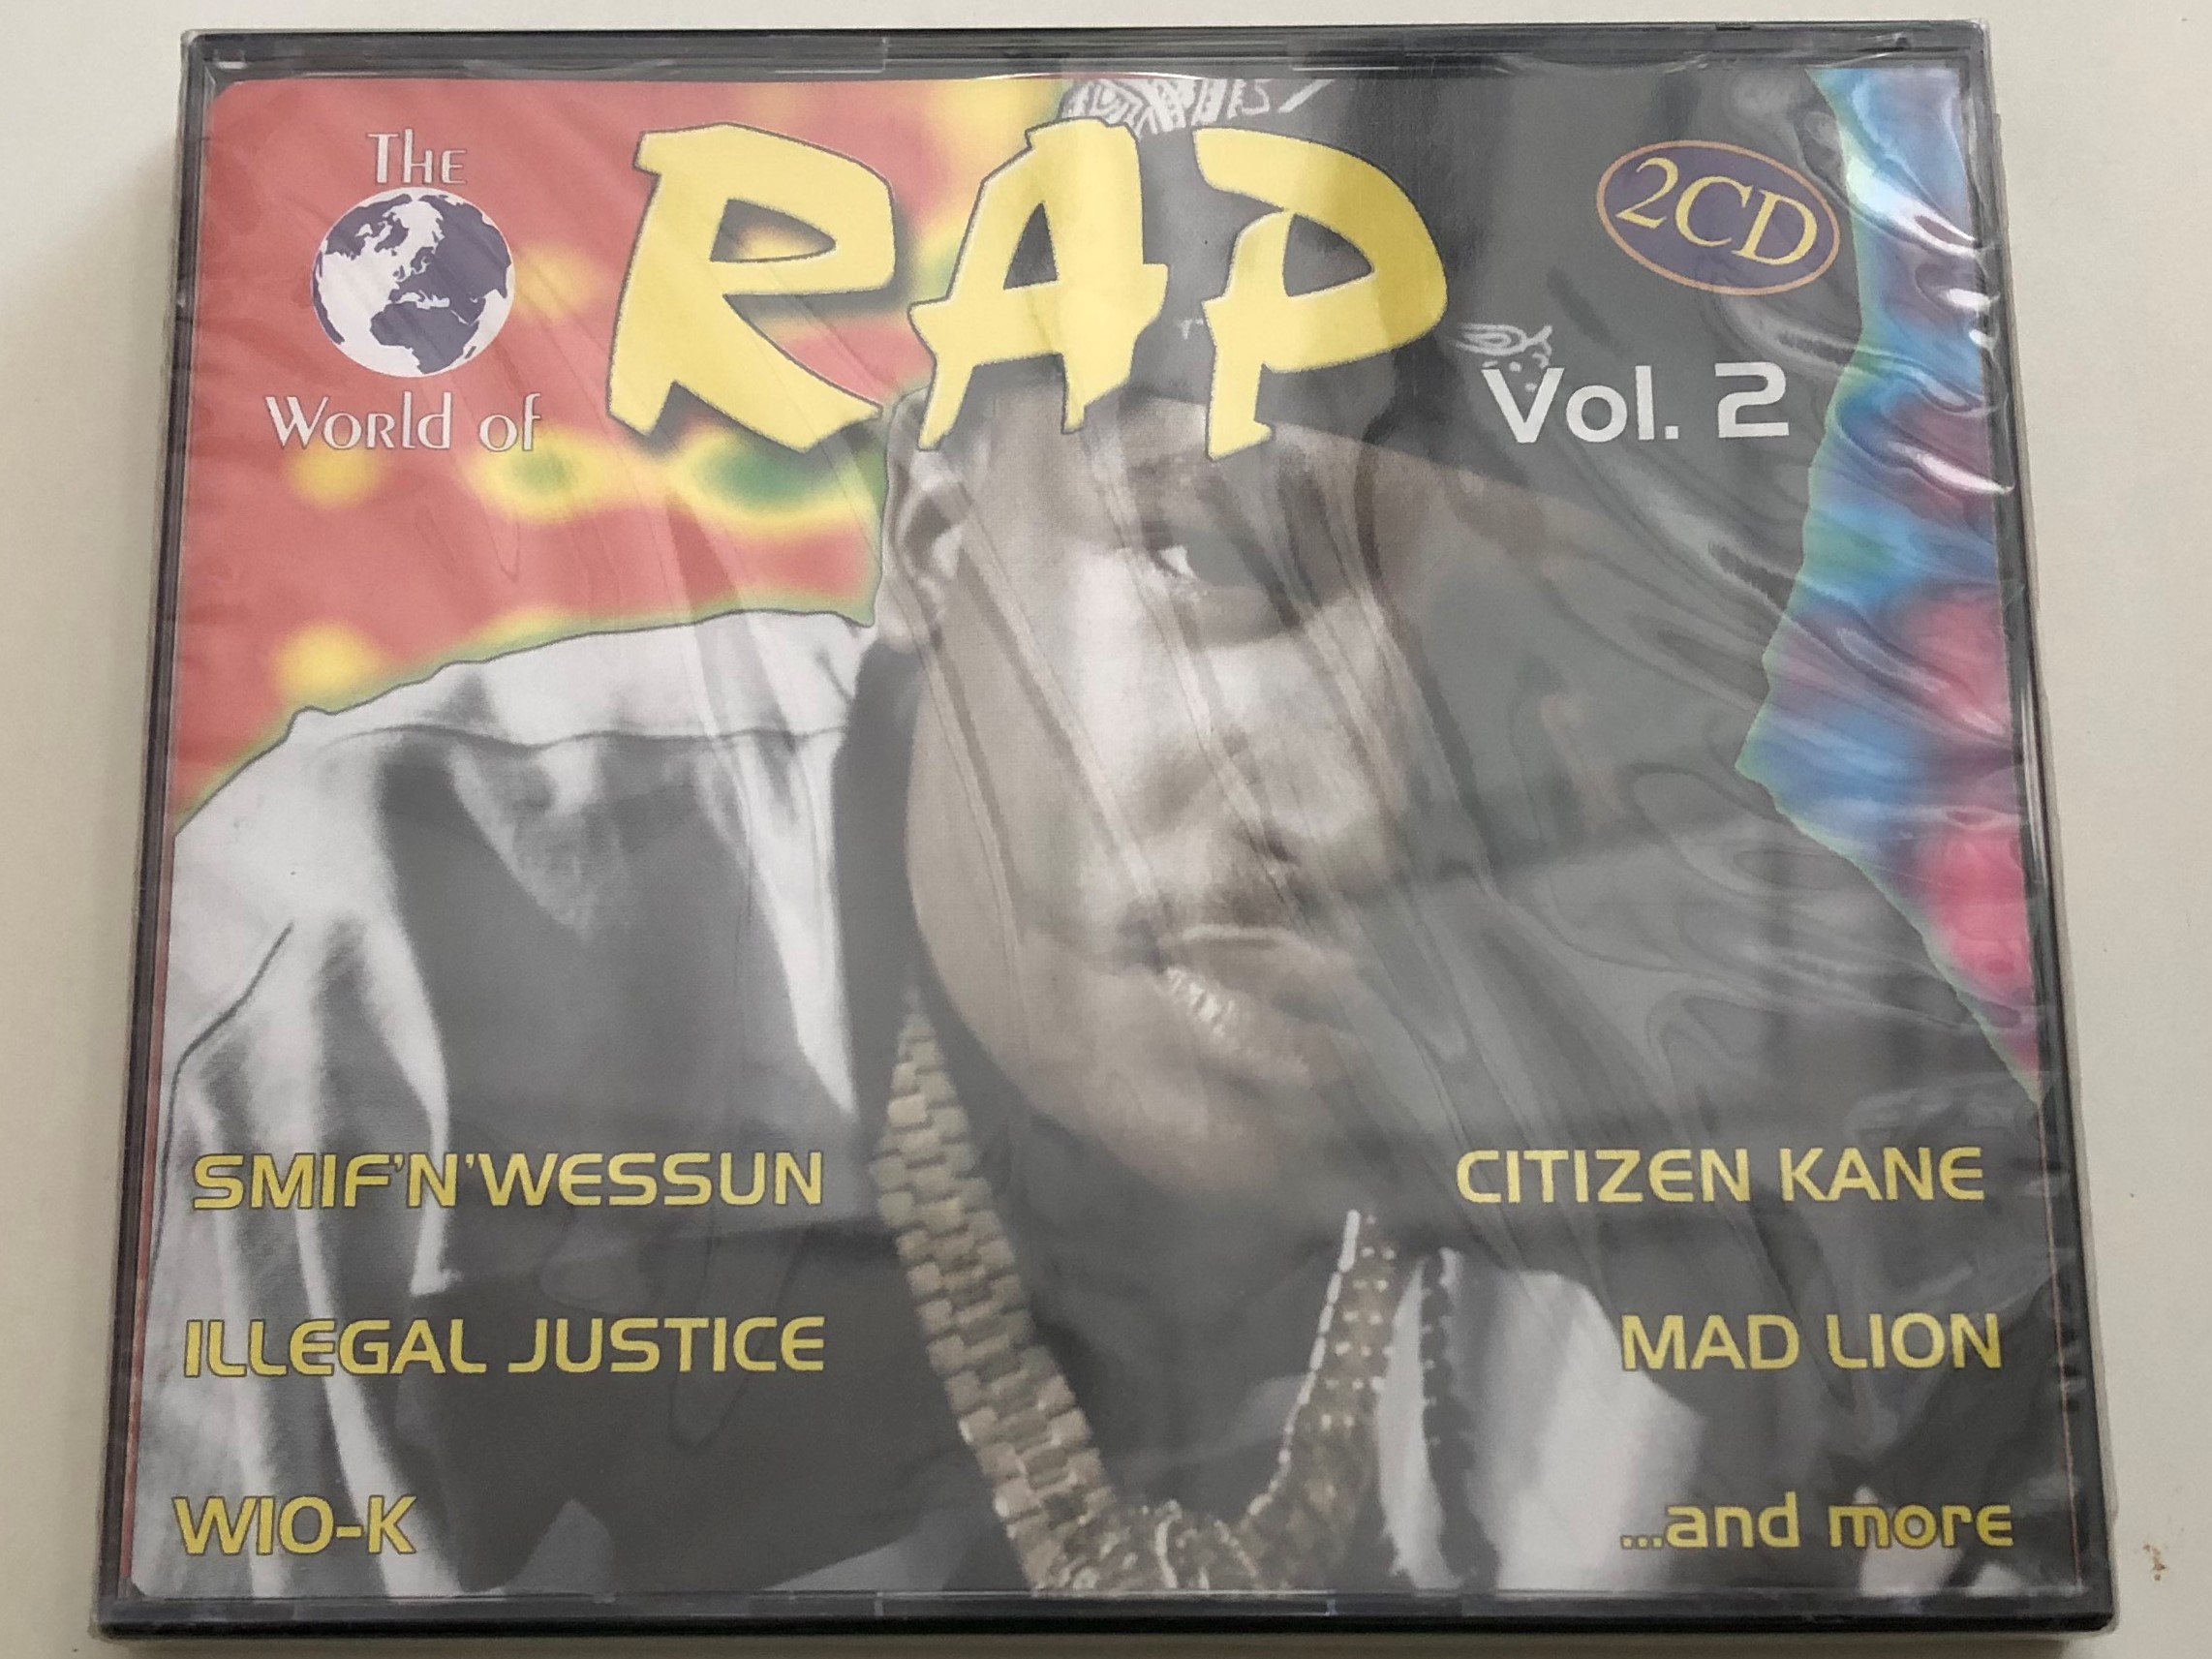 the-world-of-rap-2-smif-n-wessun-illegal-justice-wio-k-citizen-kane-mad-lion-and-many-more-zyx-music-2x-audio-cd-1998-zyx-11107-2-1-.jpg